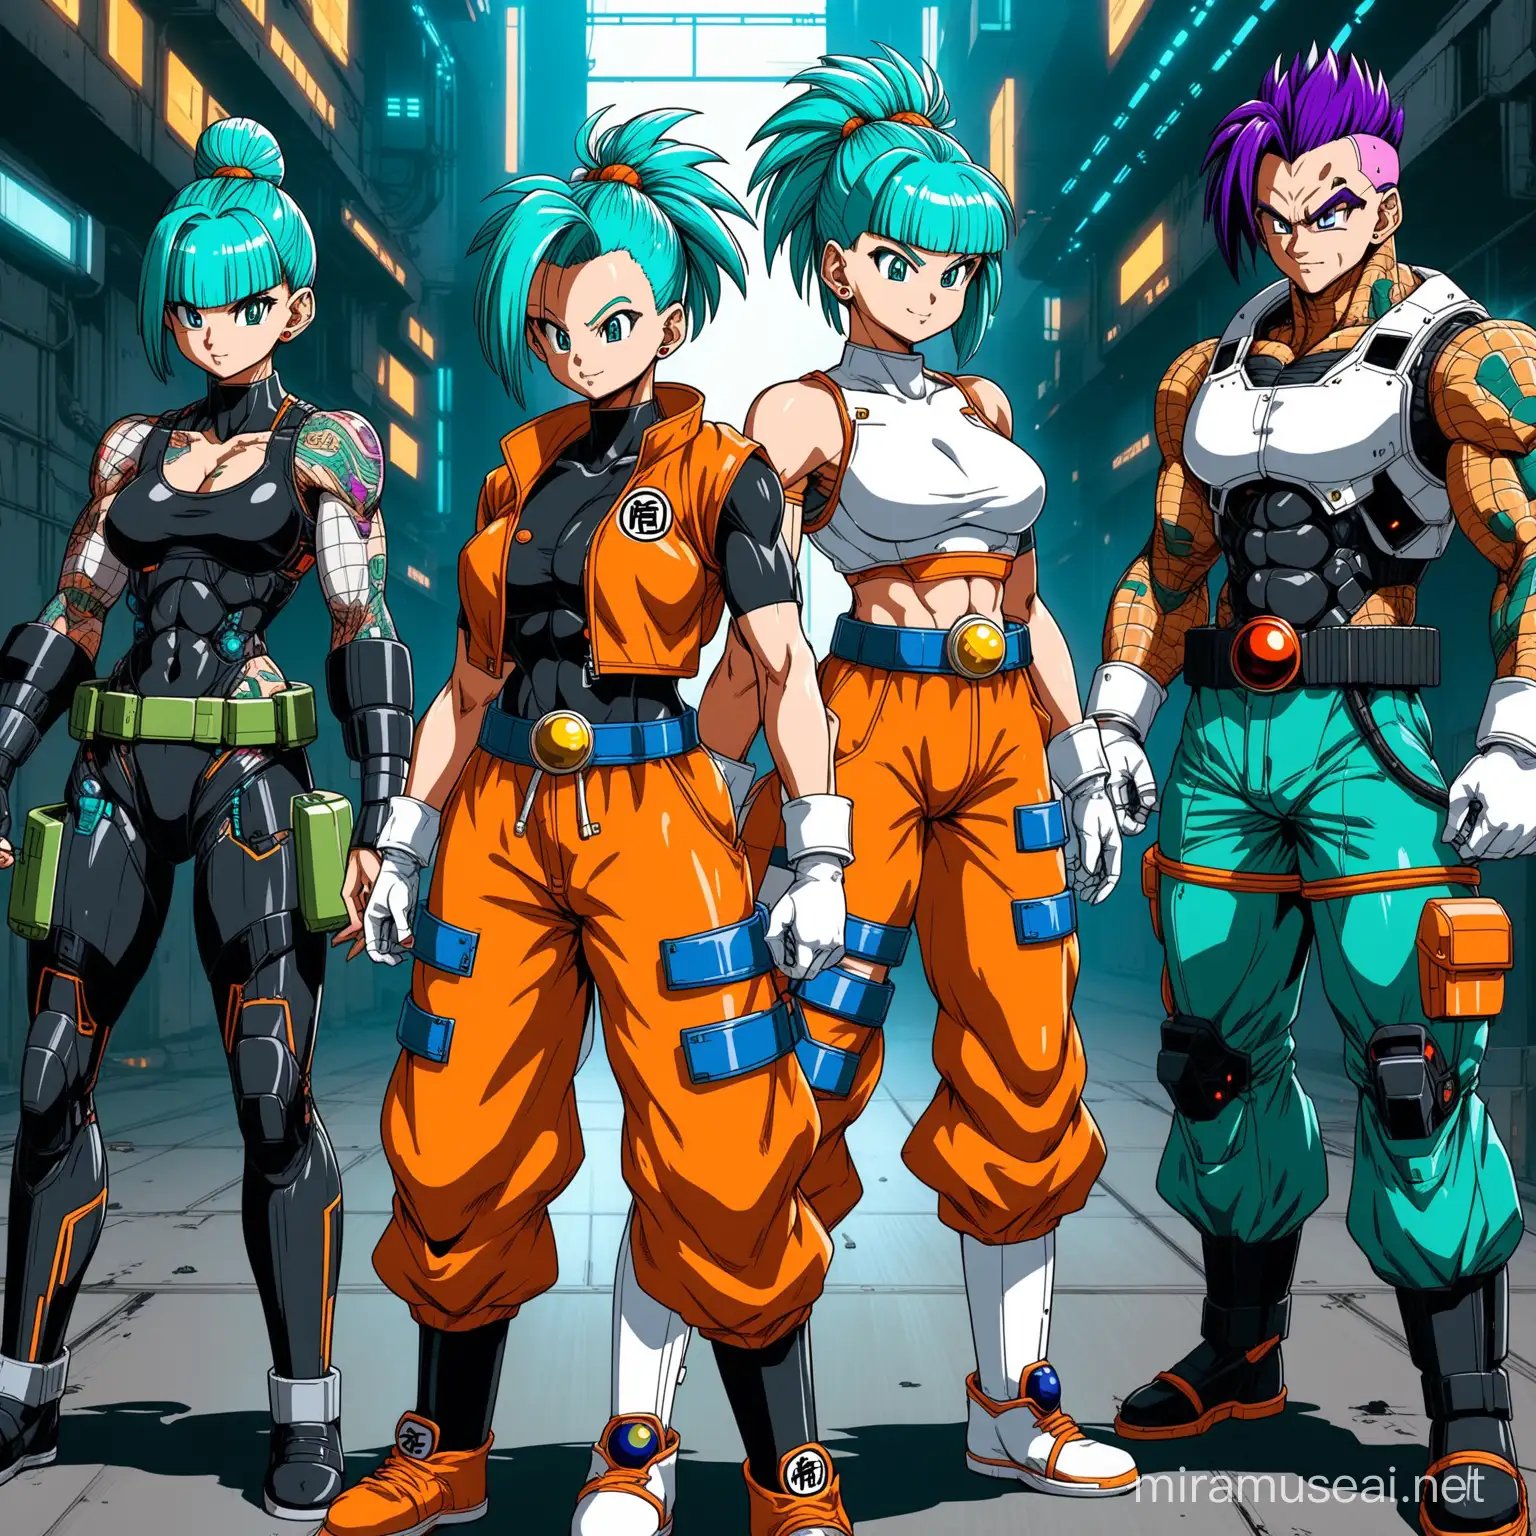 Show me dragon ball z alcharacters in a cyberpunk setting with cyberpunk body modifications such as robot arms, features, and other creative body modifications while still making the characters recongnizable and outfits that are in the cyberpunk world, leave some skin and recognizable features so that the characters look like they do in dragon ball z but with slight cyberpunk variations, for example keep bulma's outfits and style but give it a cyberpunk twist and a couple subtle body modifications while keeping the characters in the respective world but make it look as if it's going through a cyberpunk era, make sure their face stays exactly the same, create a heavy influence of things from dragon ball and include a background from there